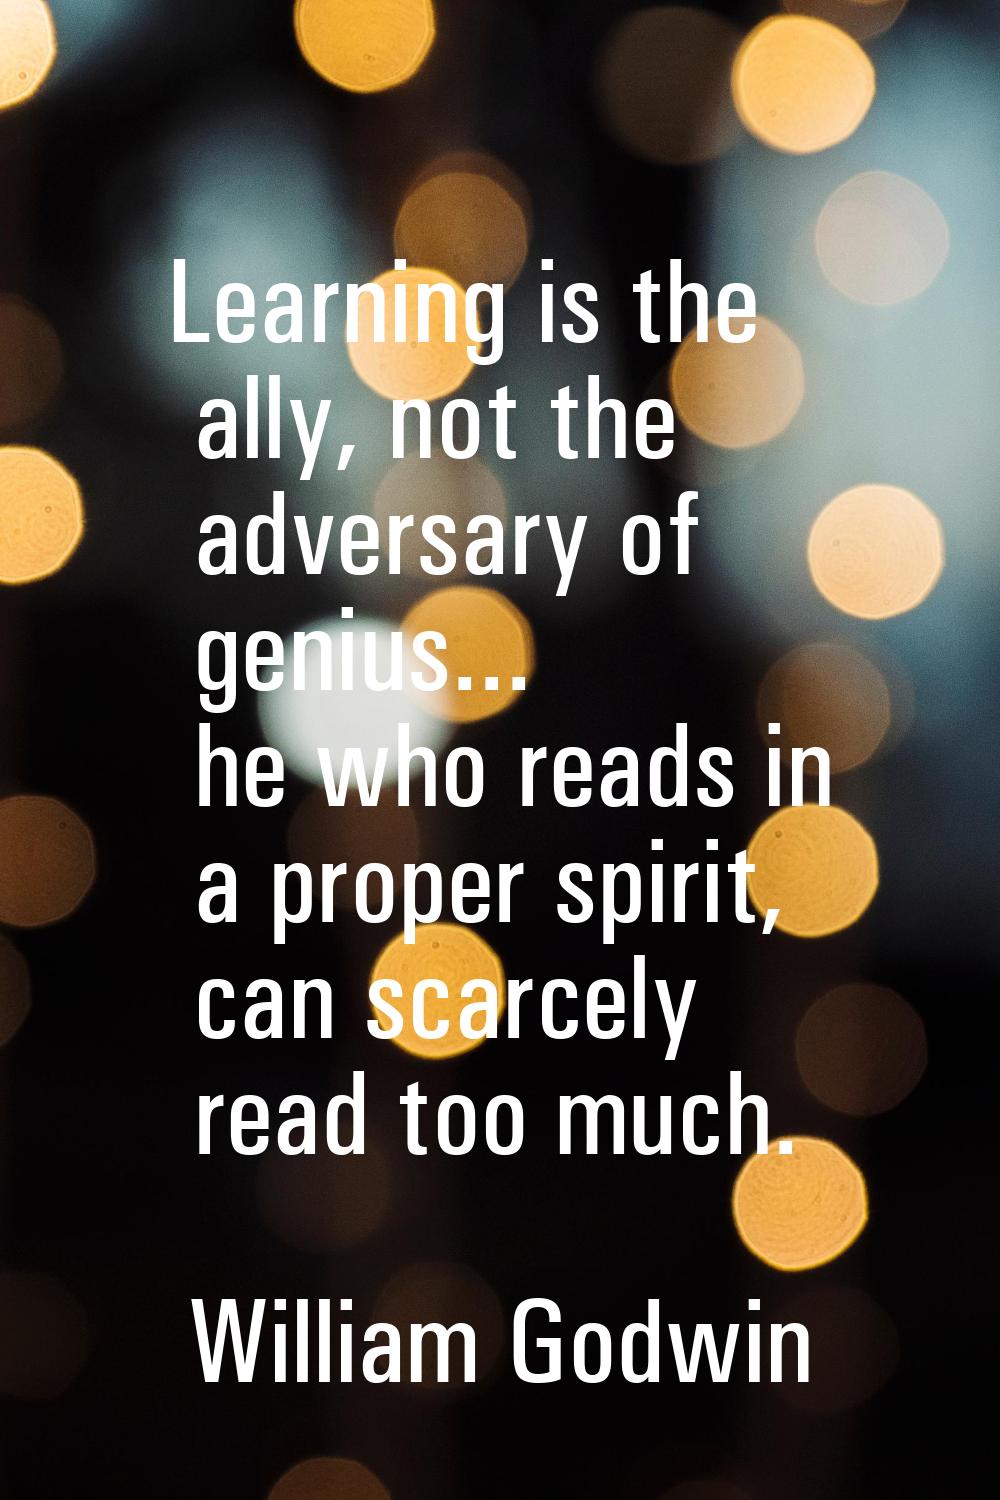 Learning is the ally, not the adversary of genius... he who reads in a proper spirit, can scarcely 